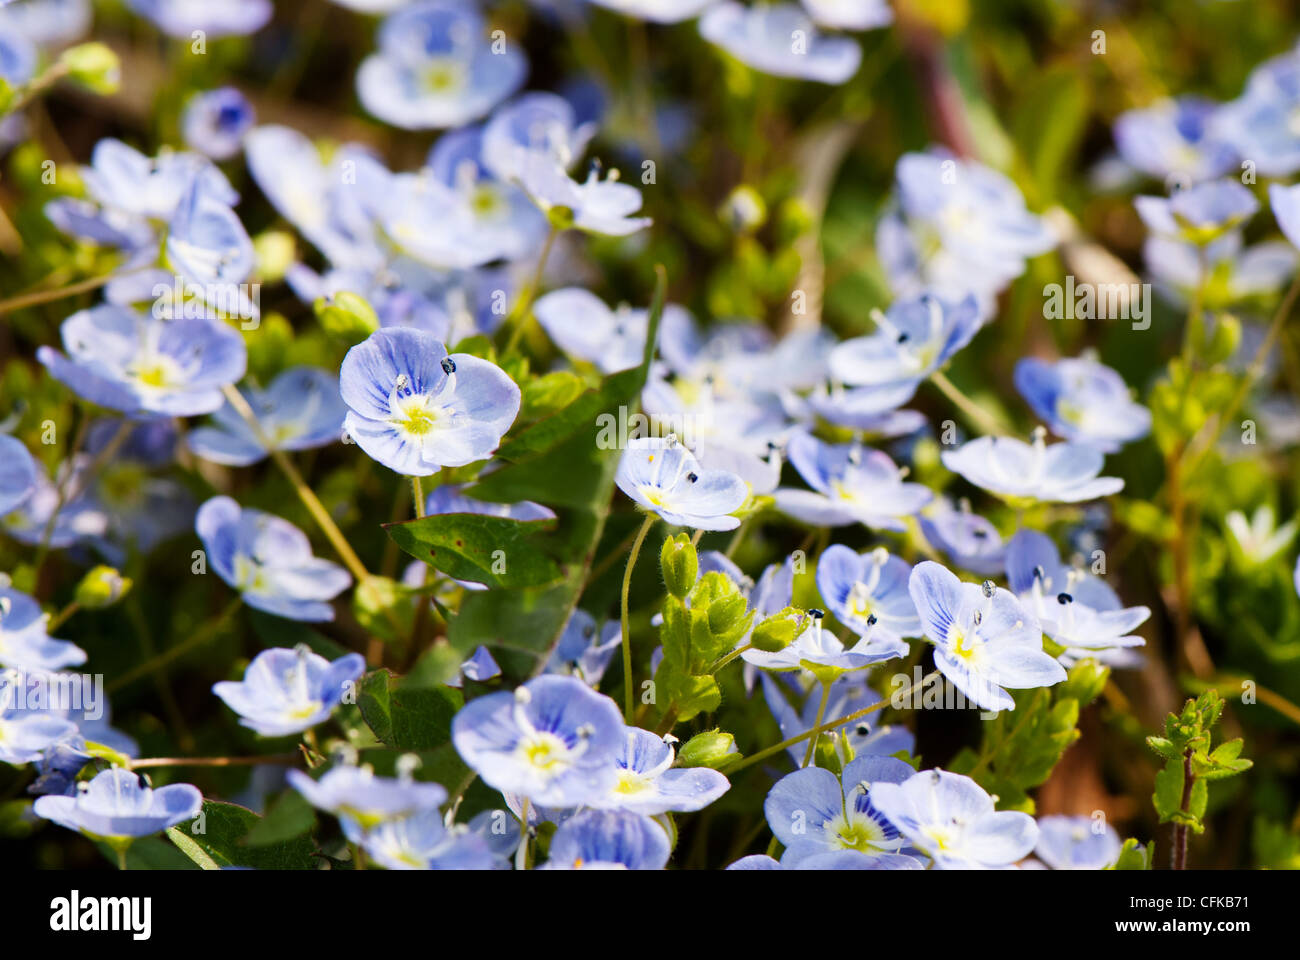 Closeup of a group of veronica persica flowers Stock Photo